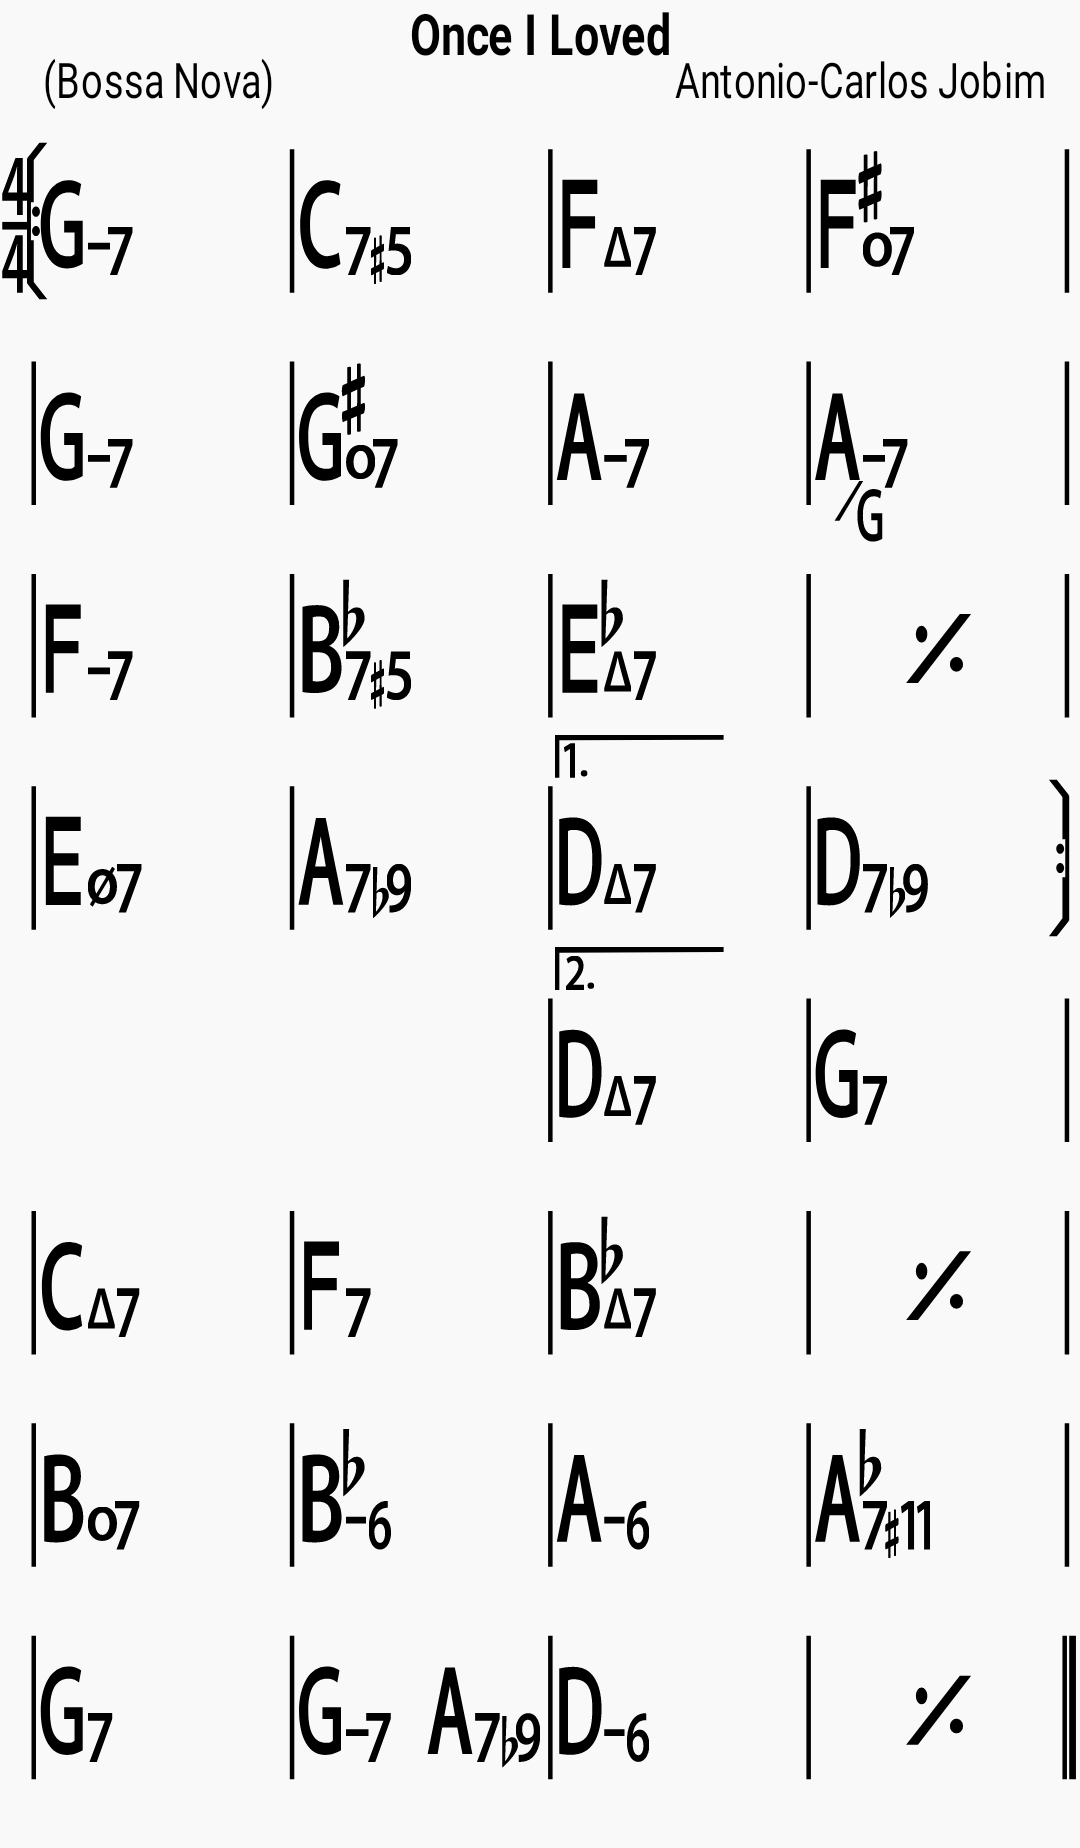 Chord chart for the jazz standard Once I Loved